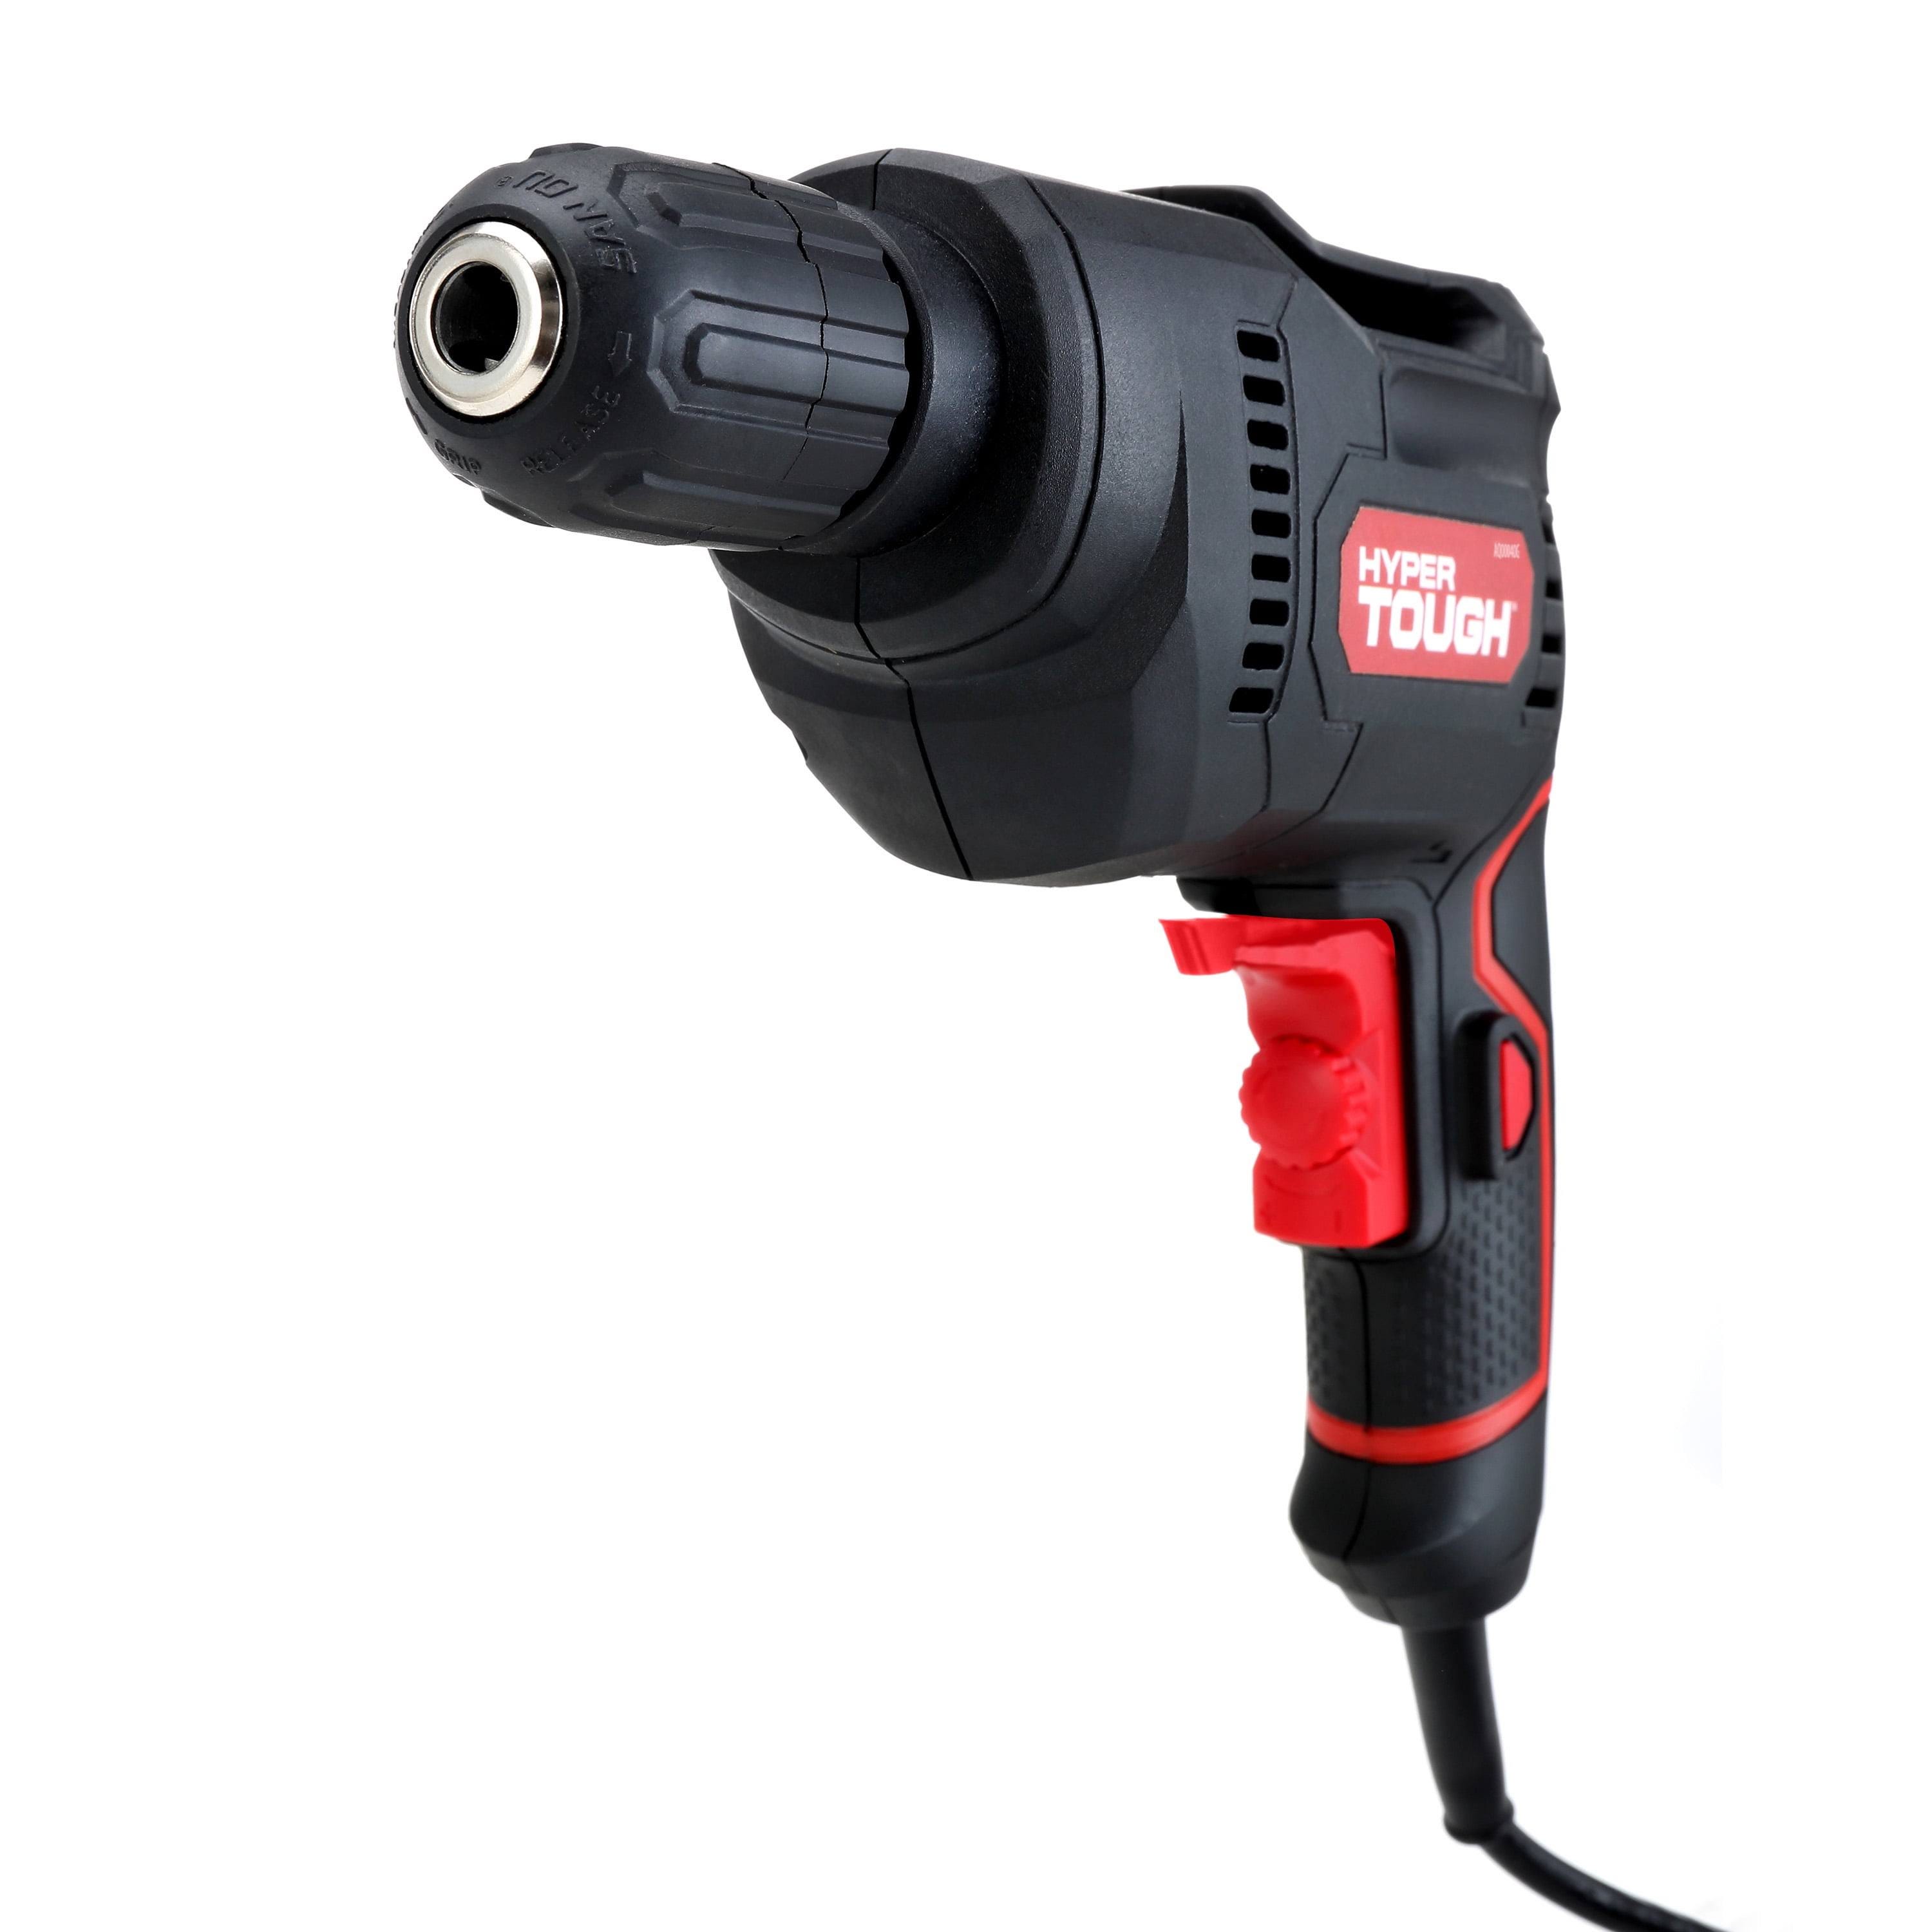 Hyper Tough 5.0Amp 3/8 in. Electric Drill: Powerful and Durable | Image